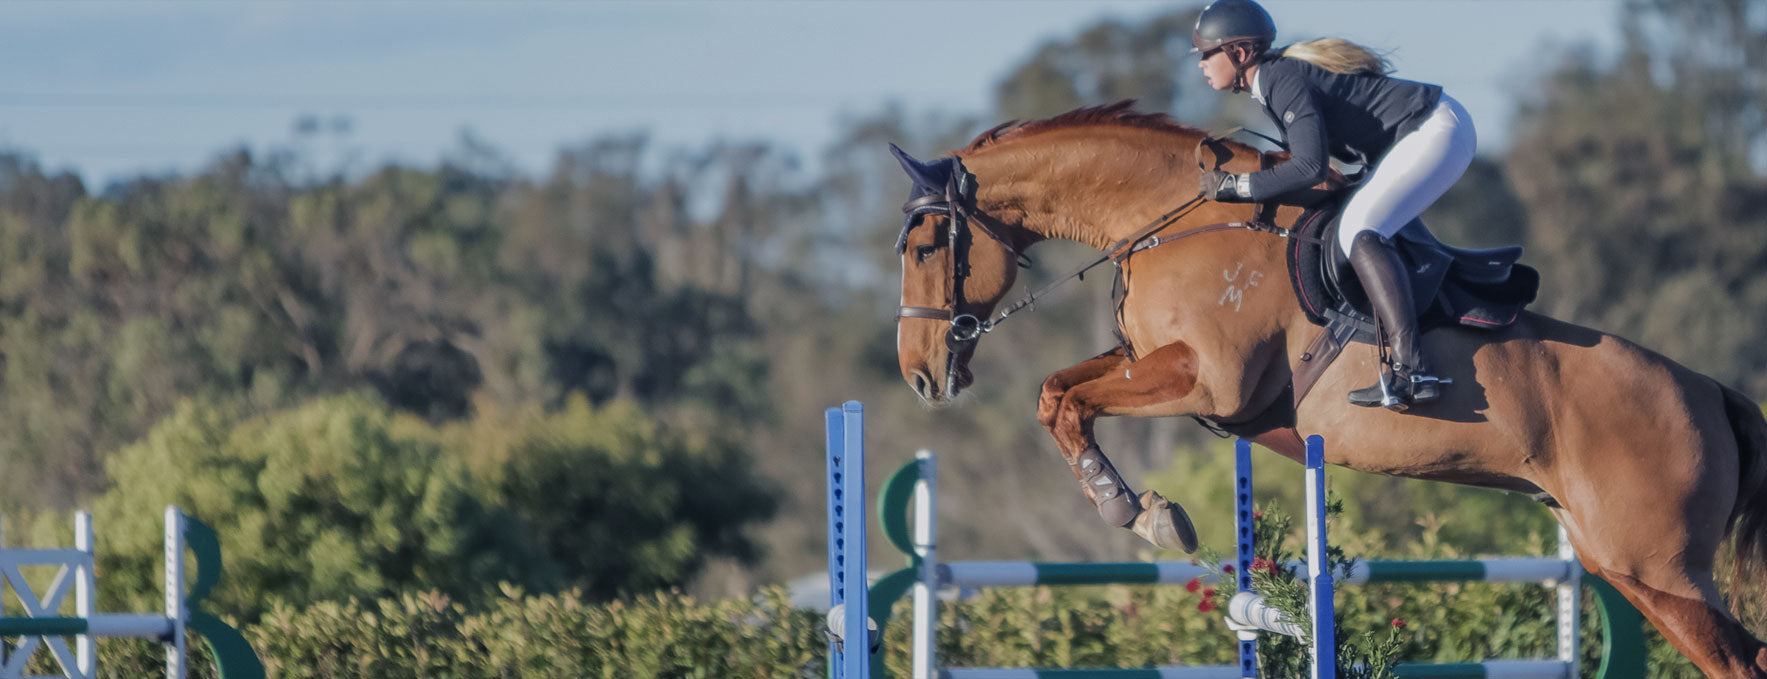 Performance Saddlefits Store-horse tack shop & saddlery for saddle accessories in Australia with your favourite brands - Acavallo, Bliss of London, Erreplus, EA Mattes, LeMieux and Tech 1